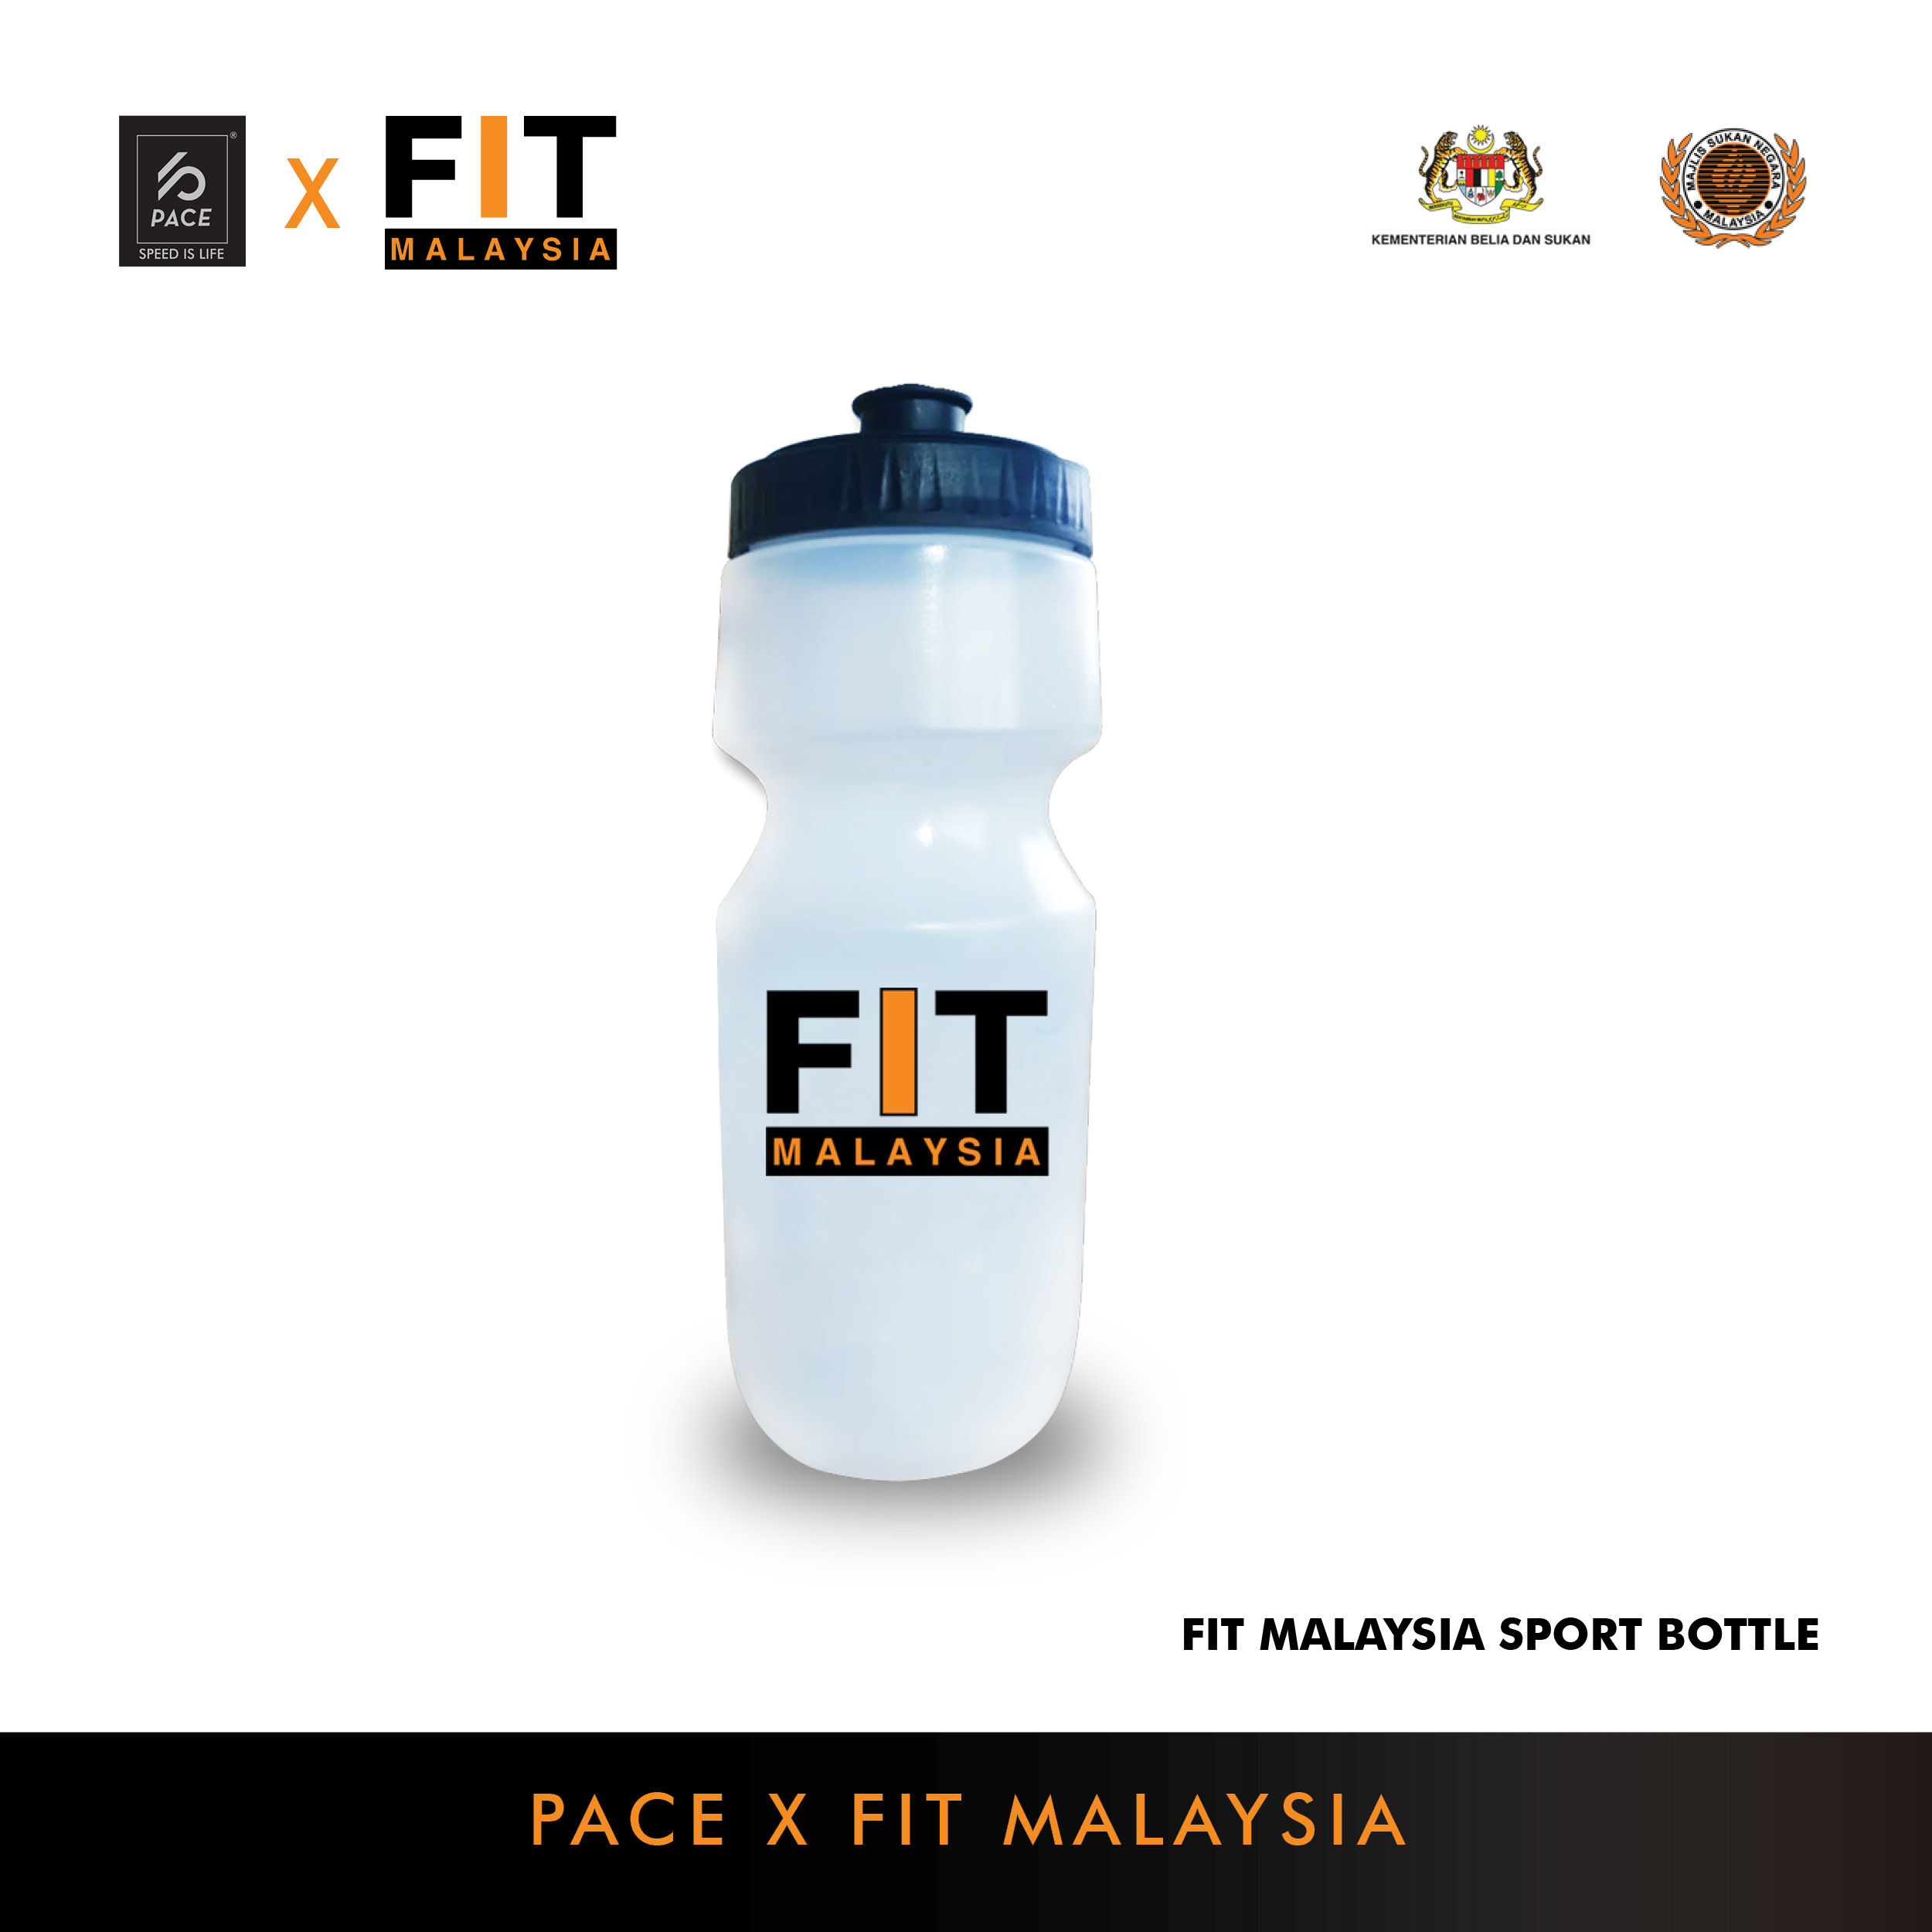 FIT MALAYSIA SPORT BOTTLE